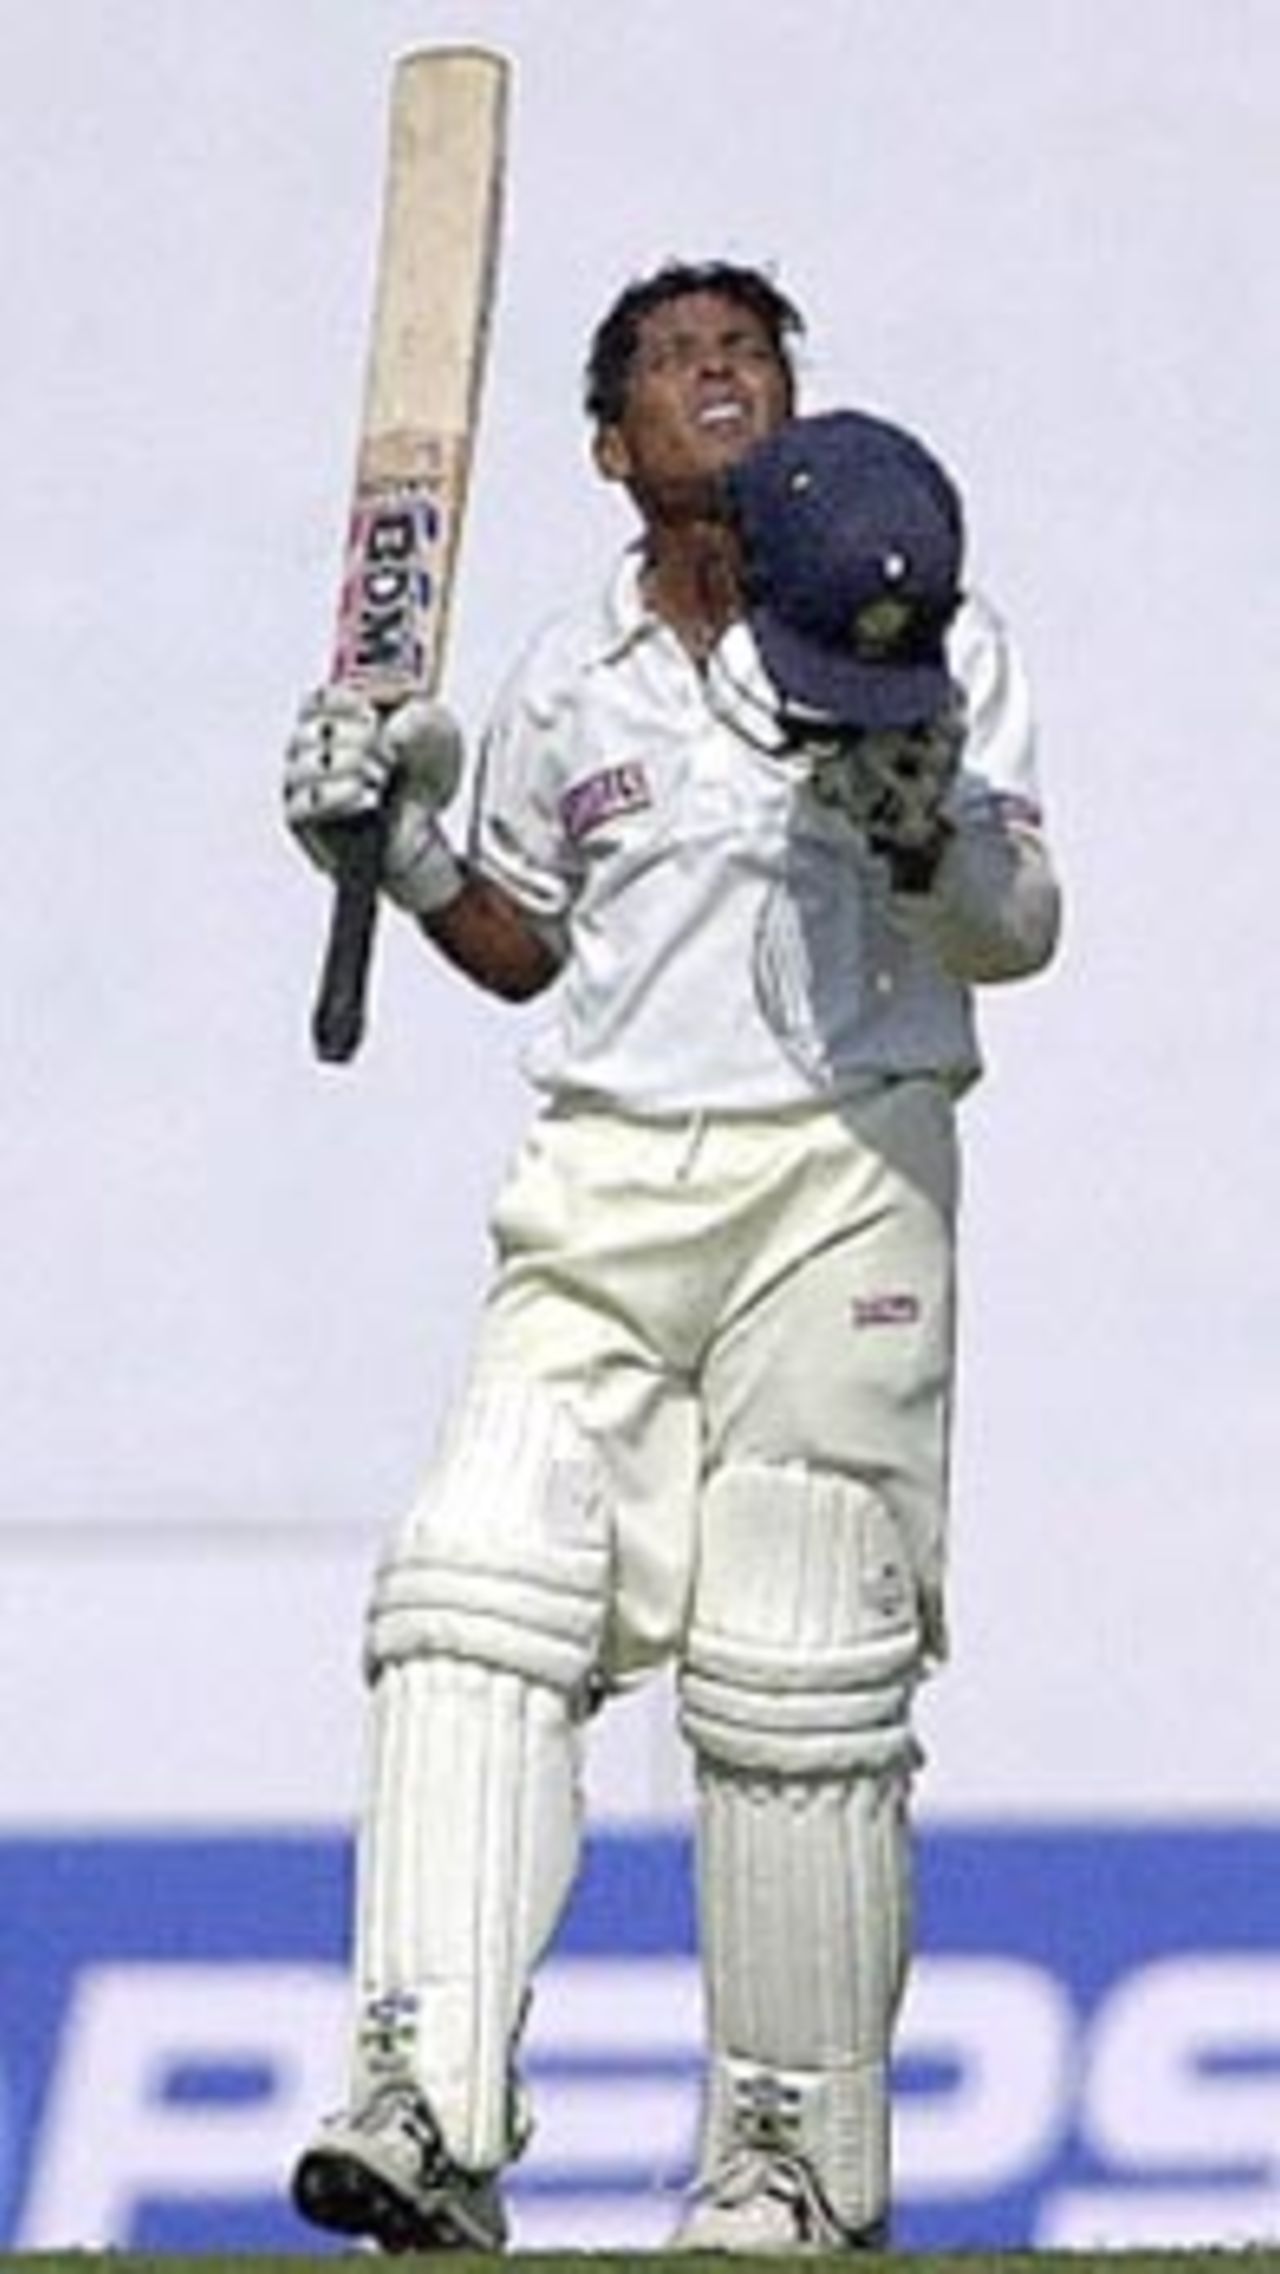 Indian opening batsman S.S. Das lifts his bat after scoring a century on the first day of the second Test cricket match between India and Zimbabwe in Nagpur, 25 November 2000. Das scored 110 runs and India made 306 for 2 at close of the first day's play. India leads Zimbabwe 1-0 in the two Test series.